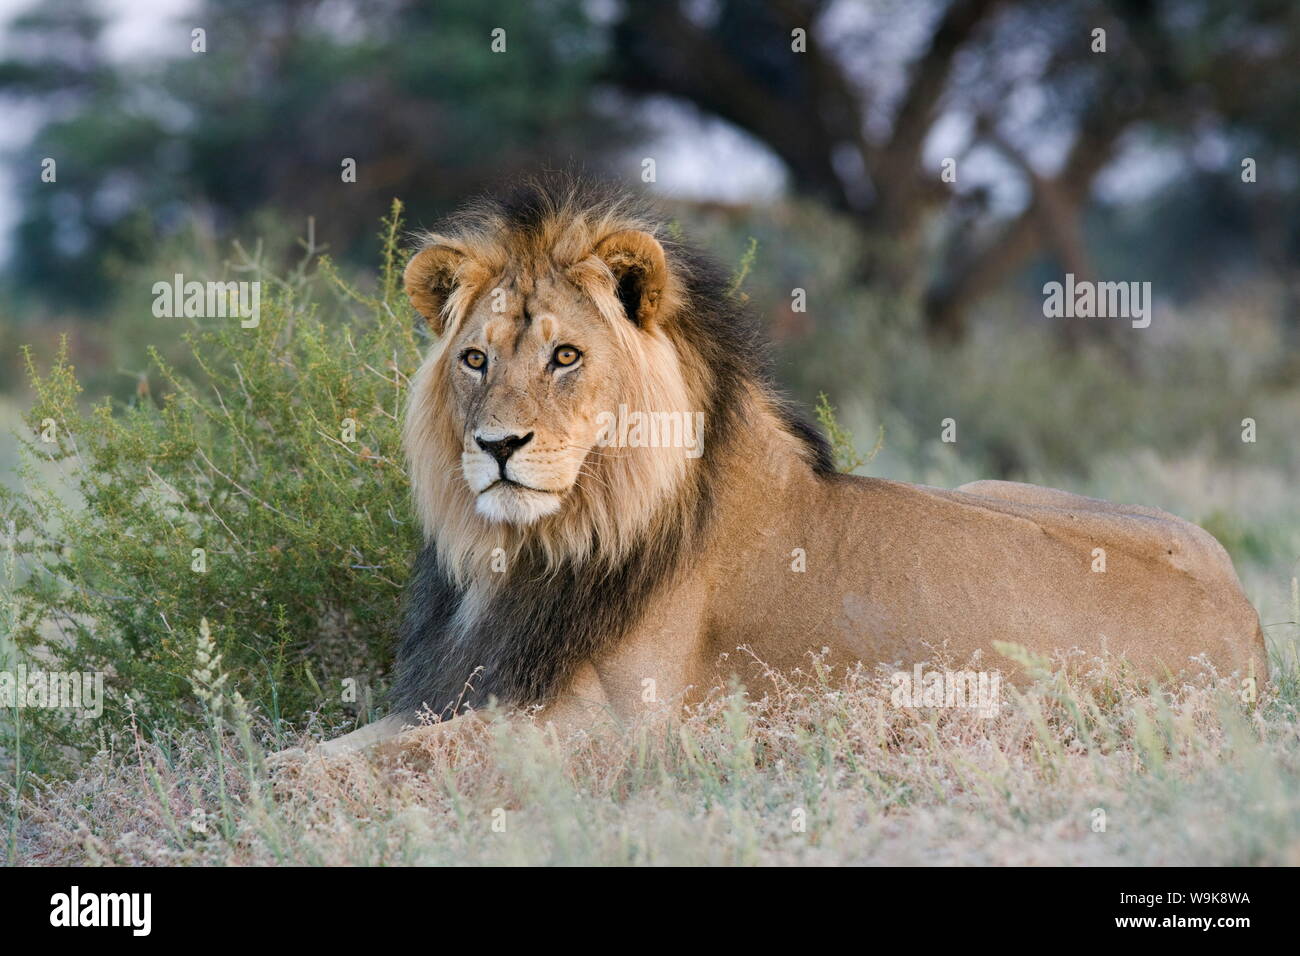 Lion (Panthera leo), Kgalagadi Transfrontier Park, Northern Cape, South Africa, Africa Stock Photo